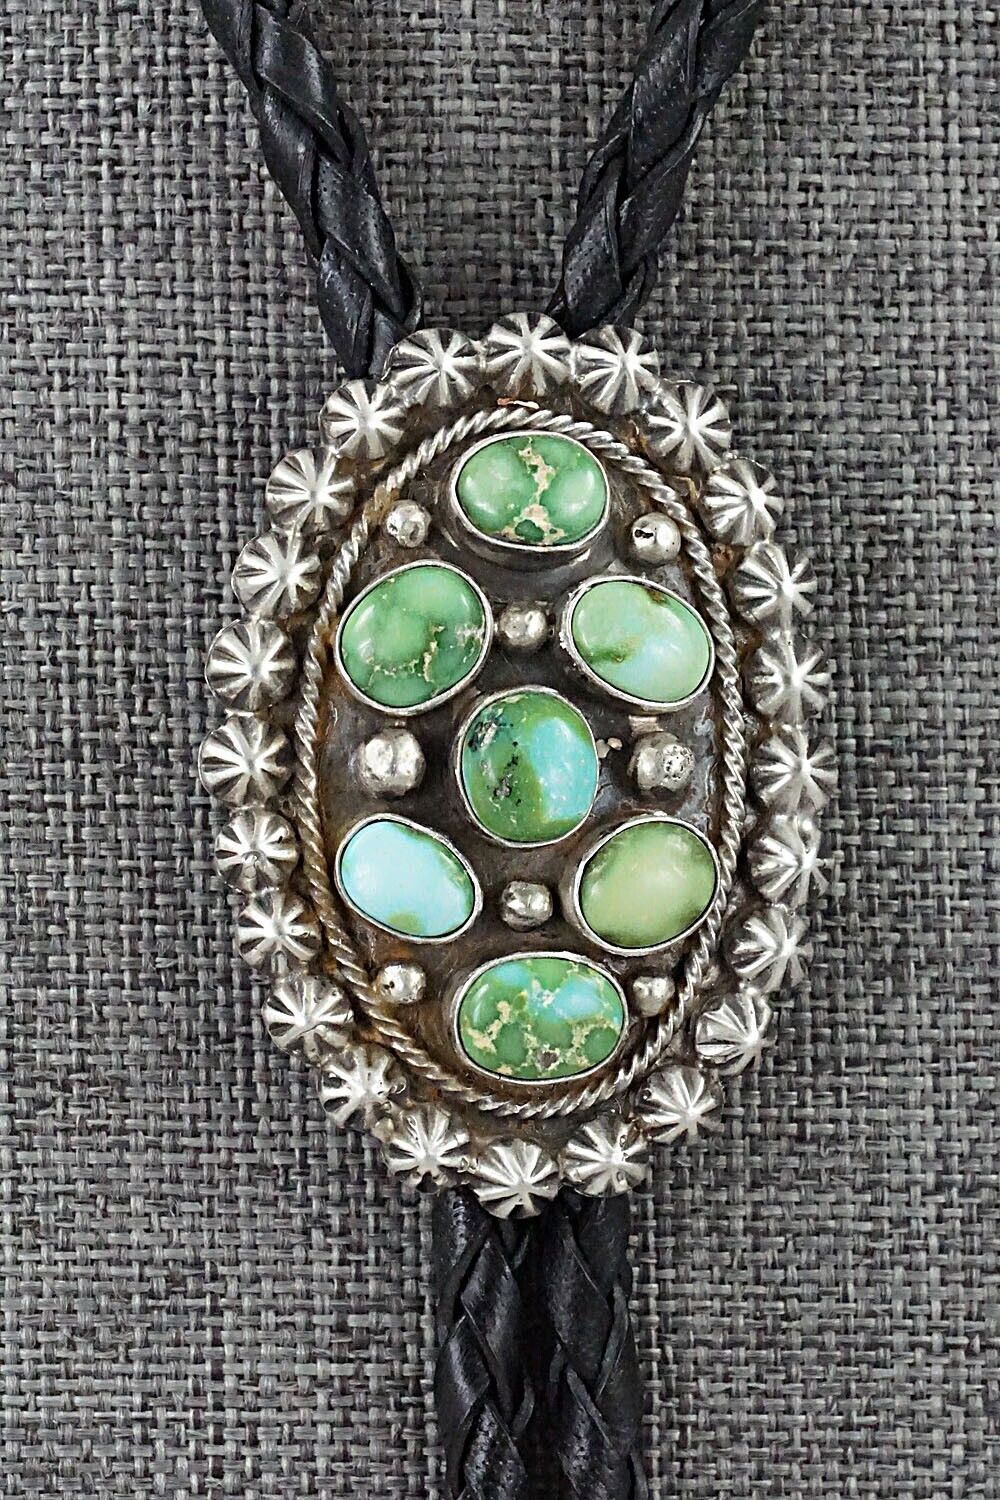 Turquoise & Sterling Silver Bolo Tie - Paige Gordon